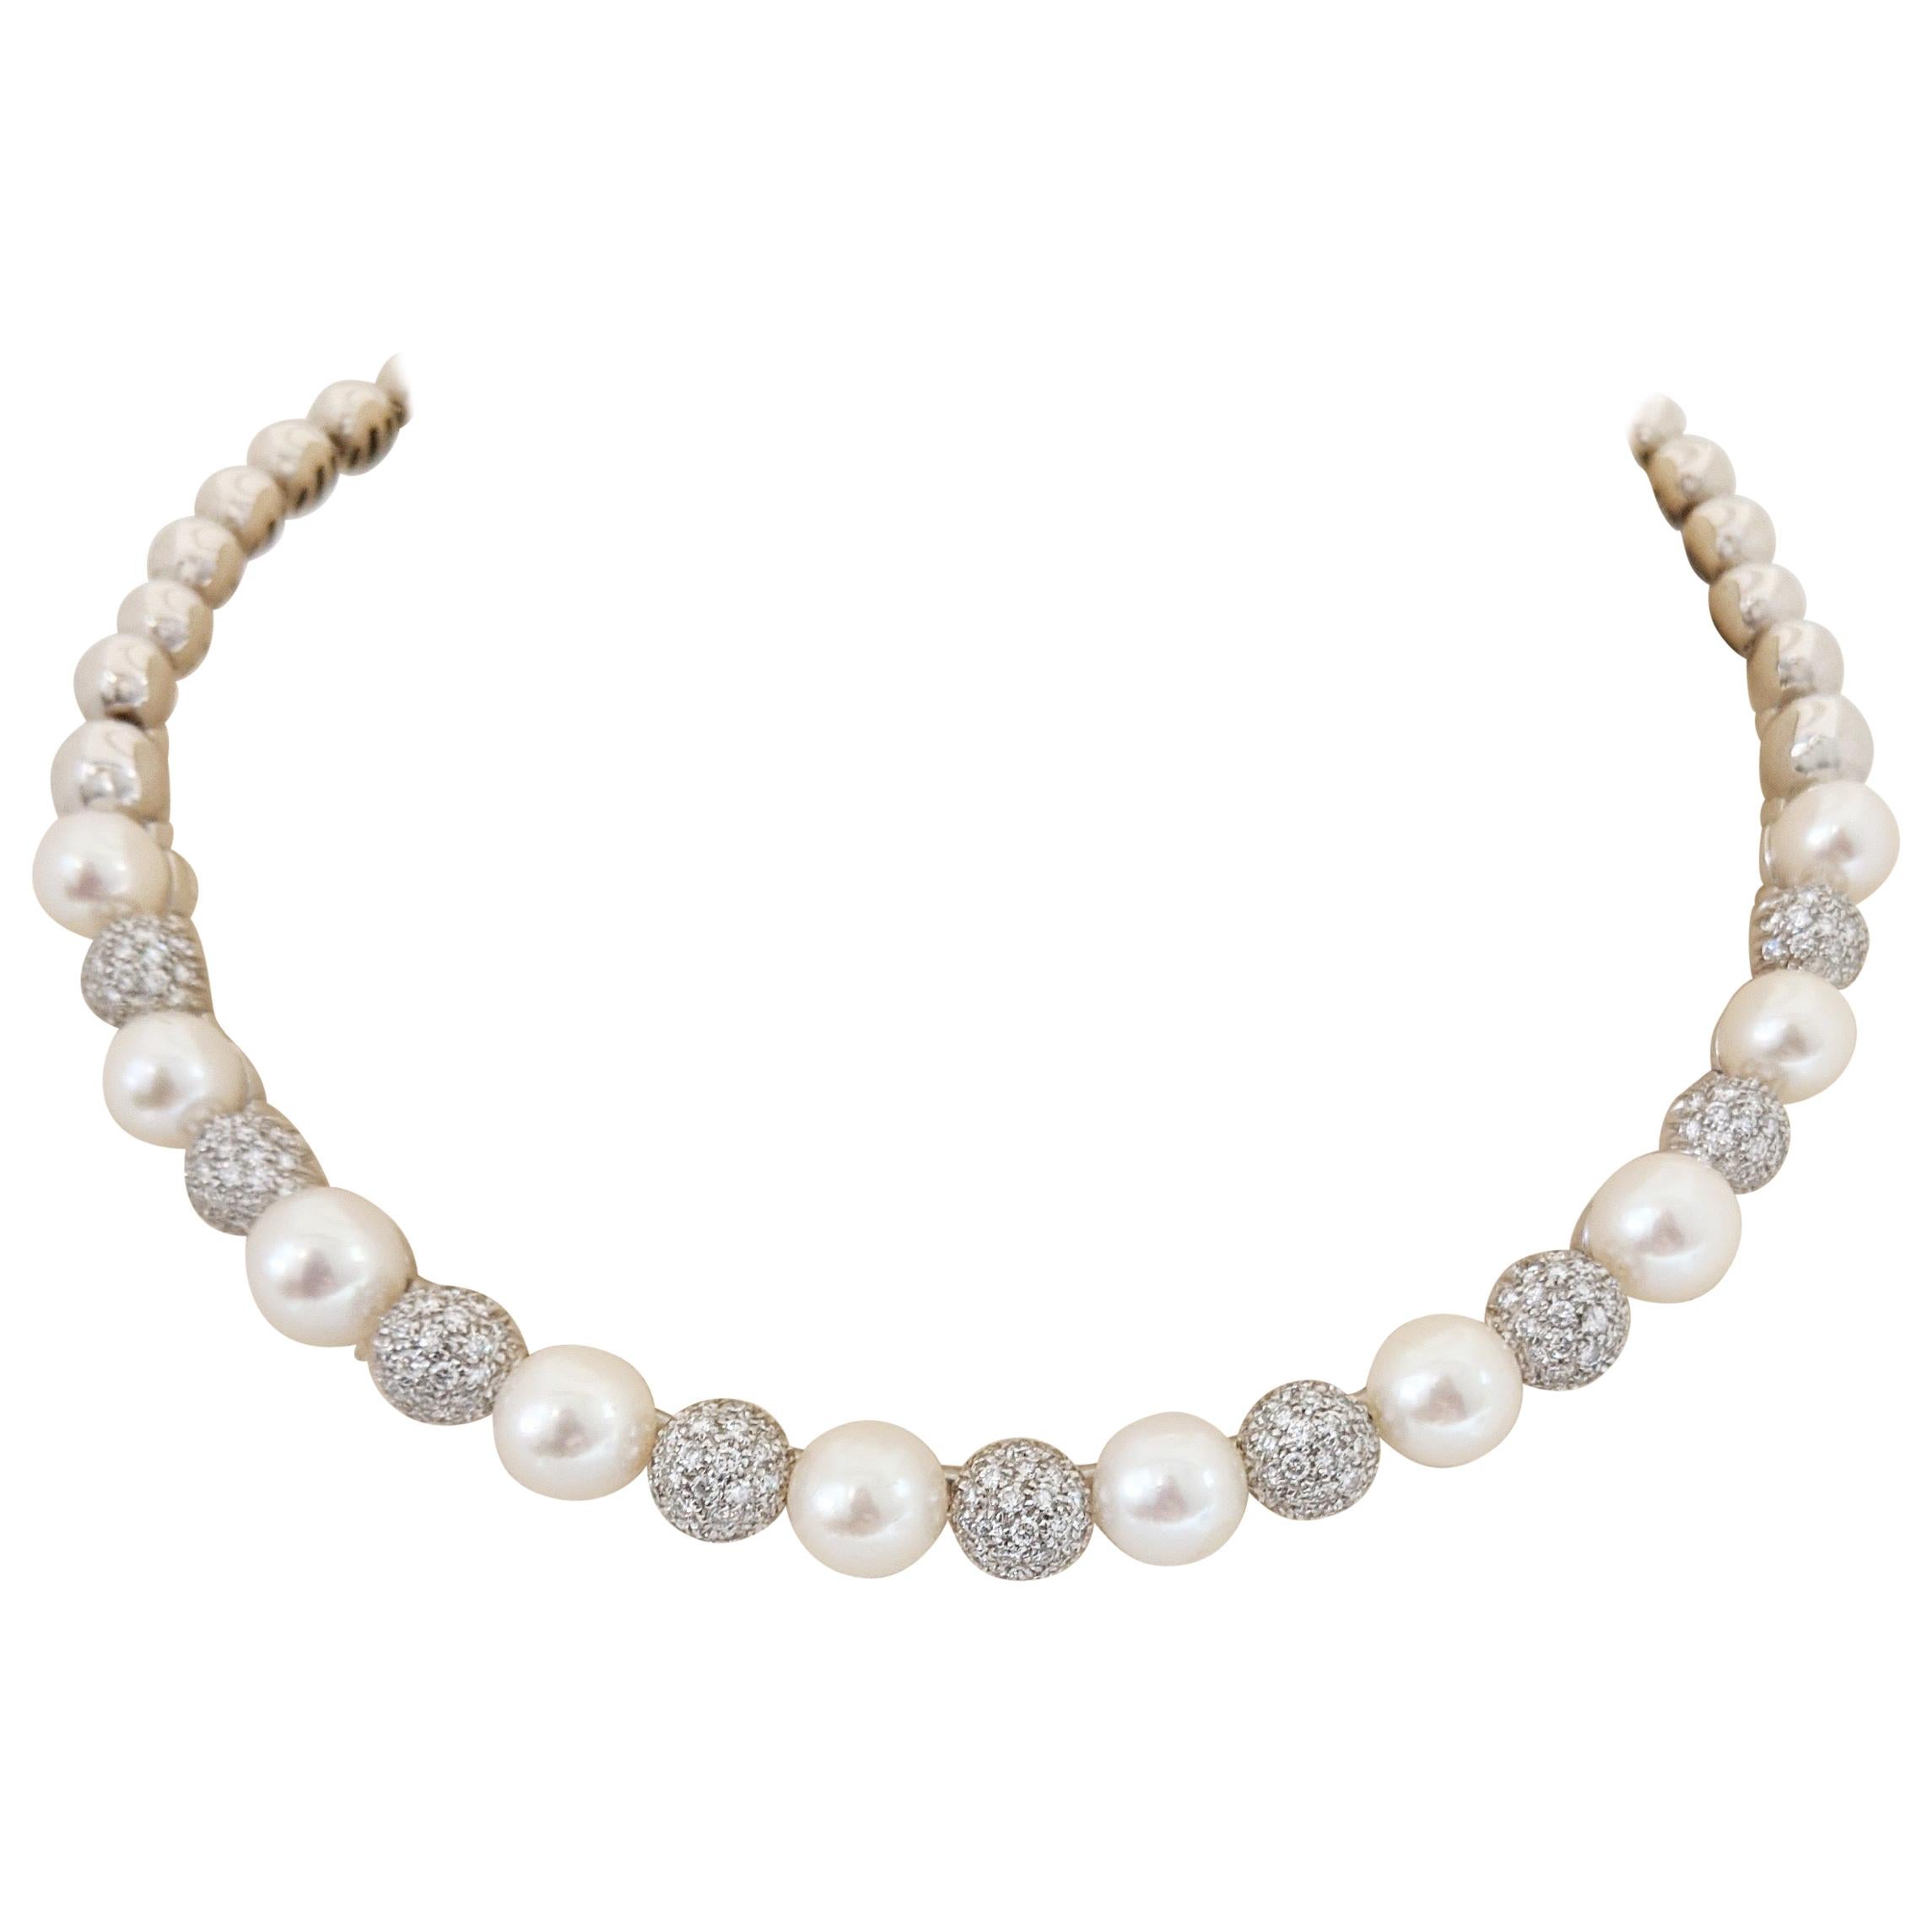 18 Karat White Gold, 4.39 Carat Diamond and Cultured Pearl Choker Necklace